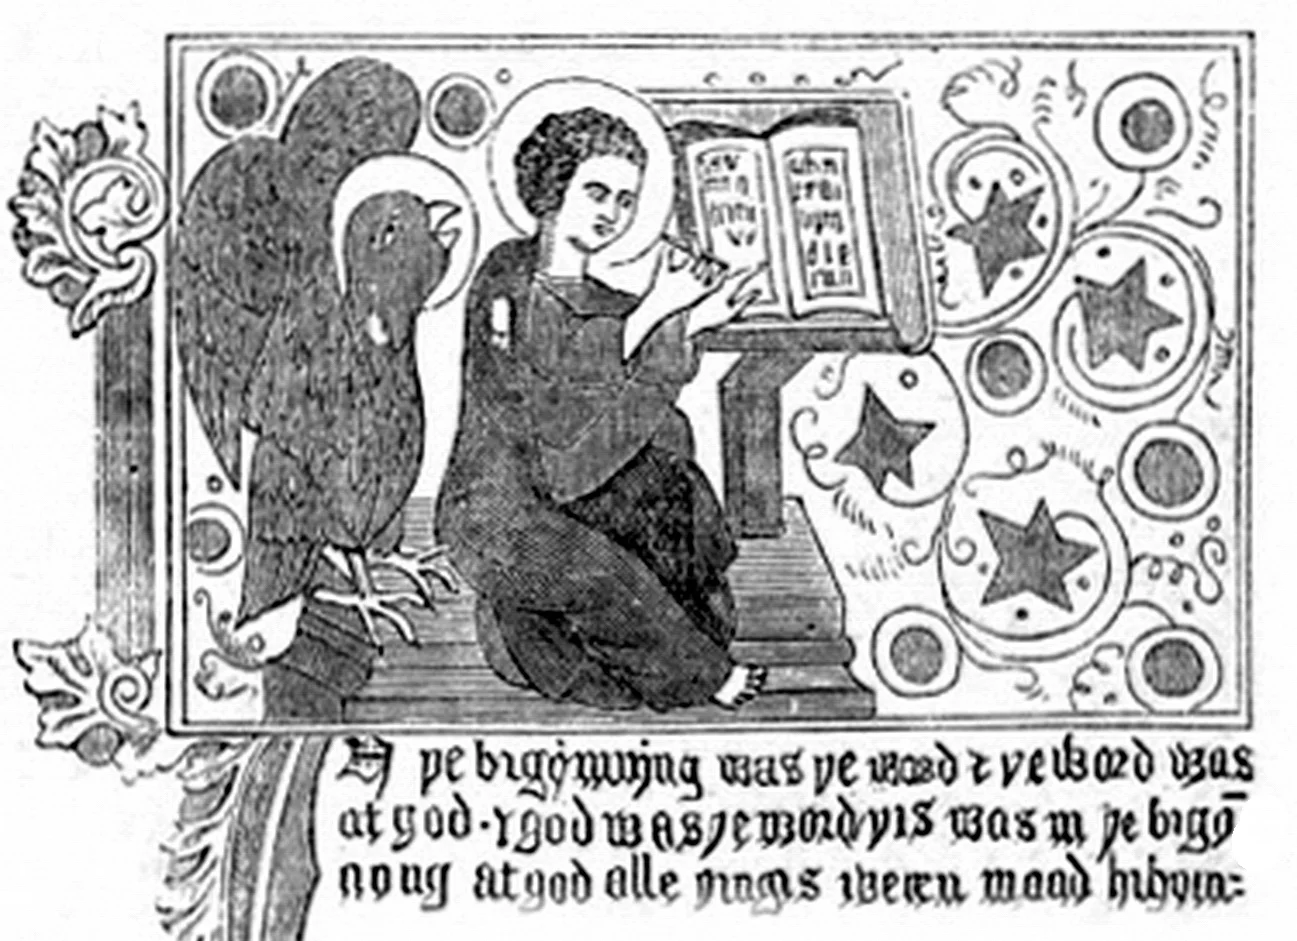 Part of the first page of the Gospel of John from a Wycliffe Bible. It is illustrated with a figure writing in a book, observed by a bird, with stars in the background